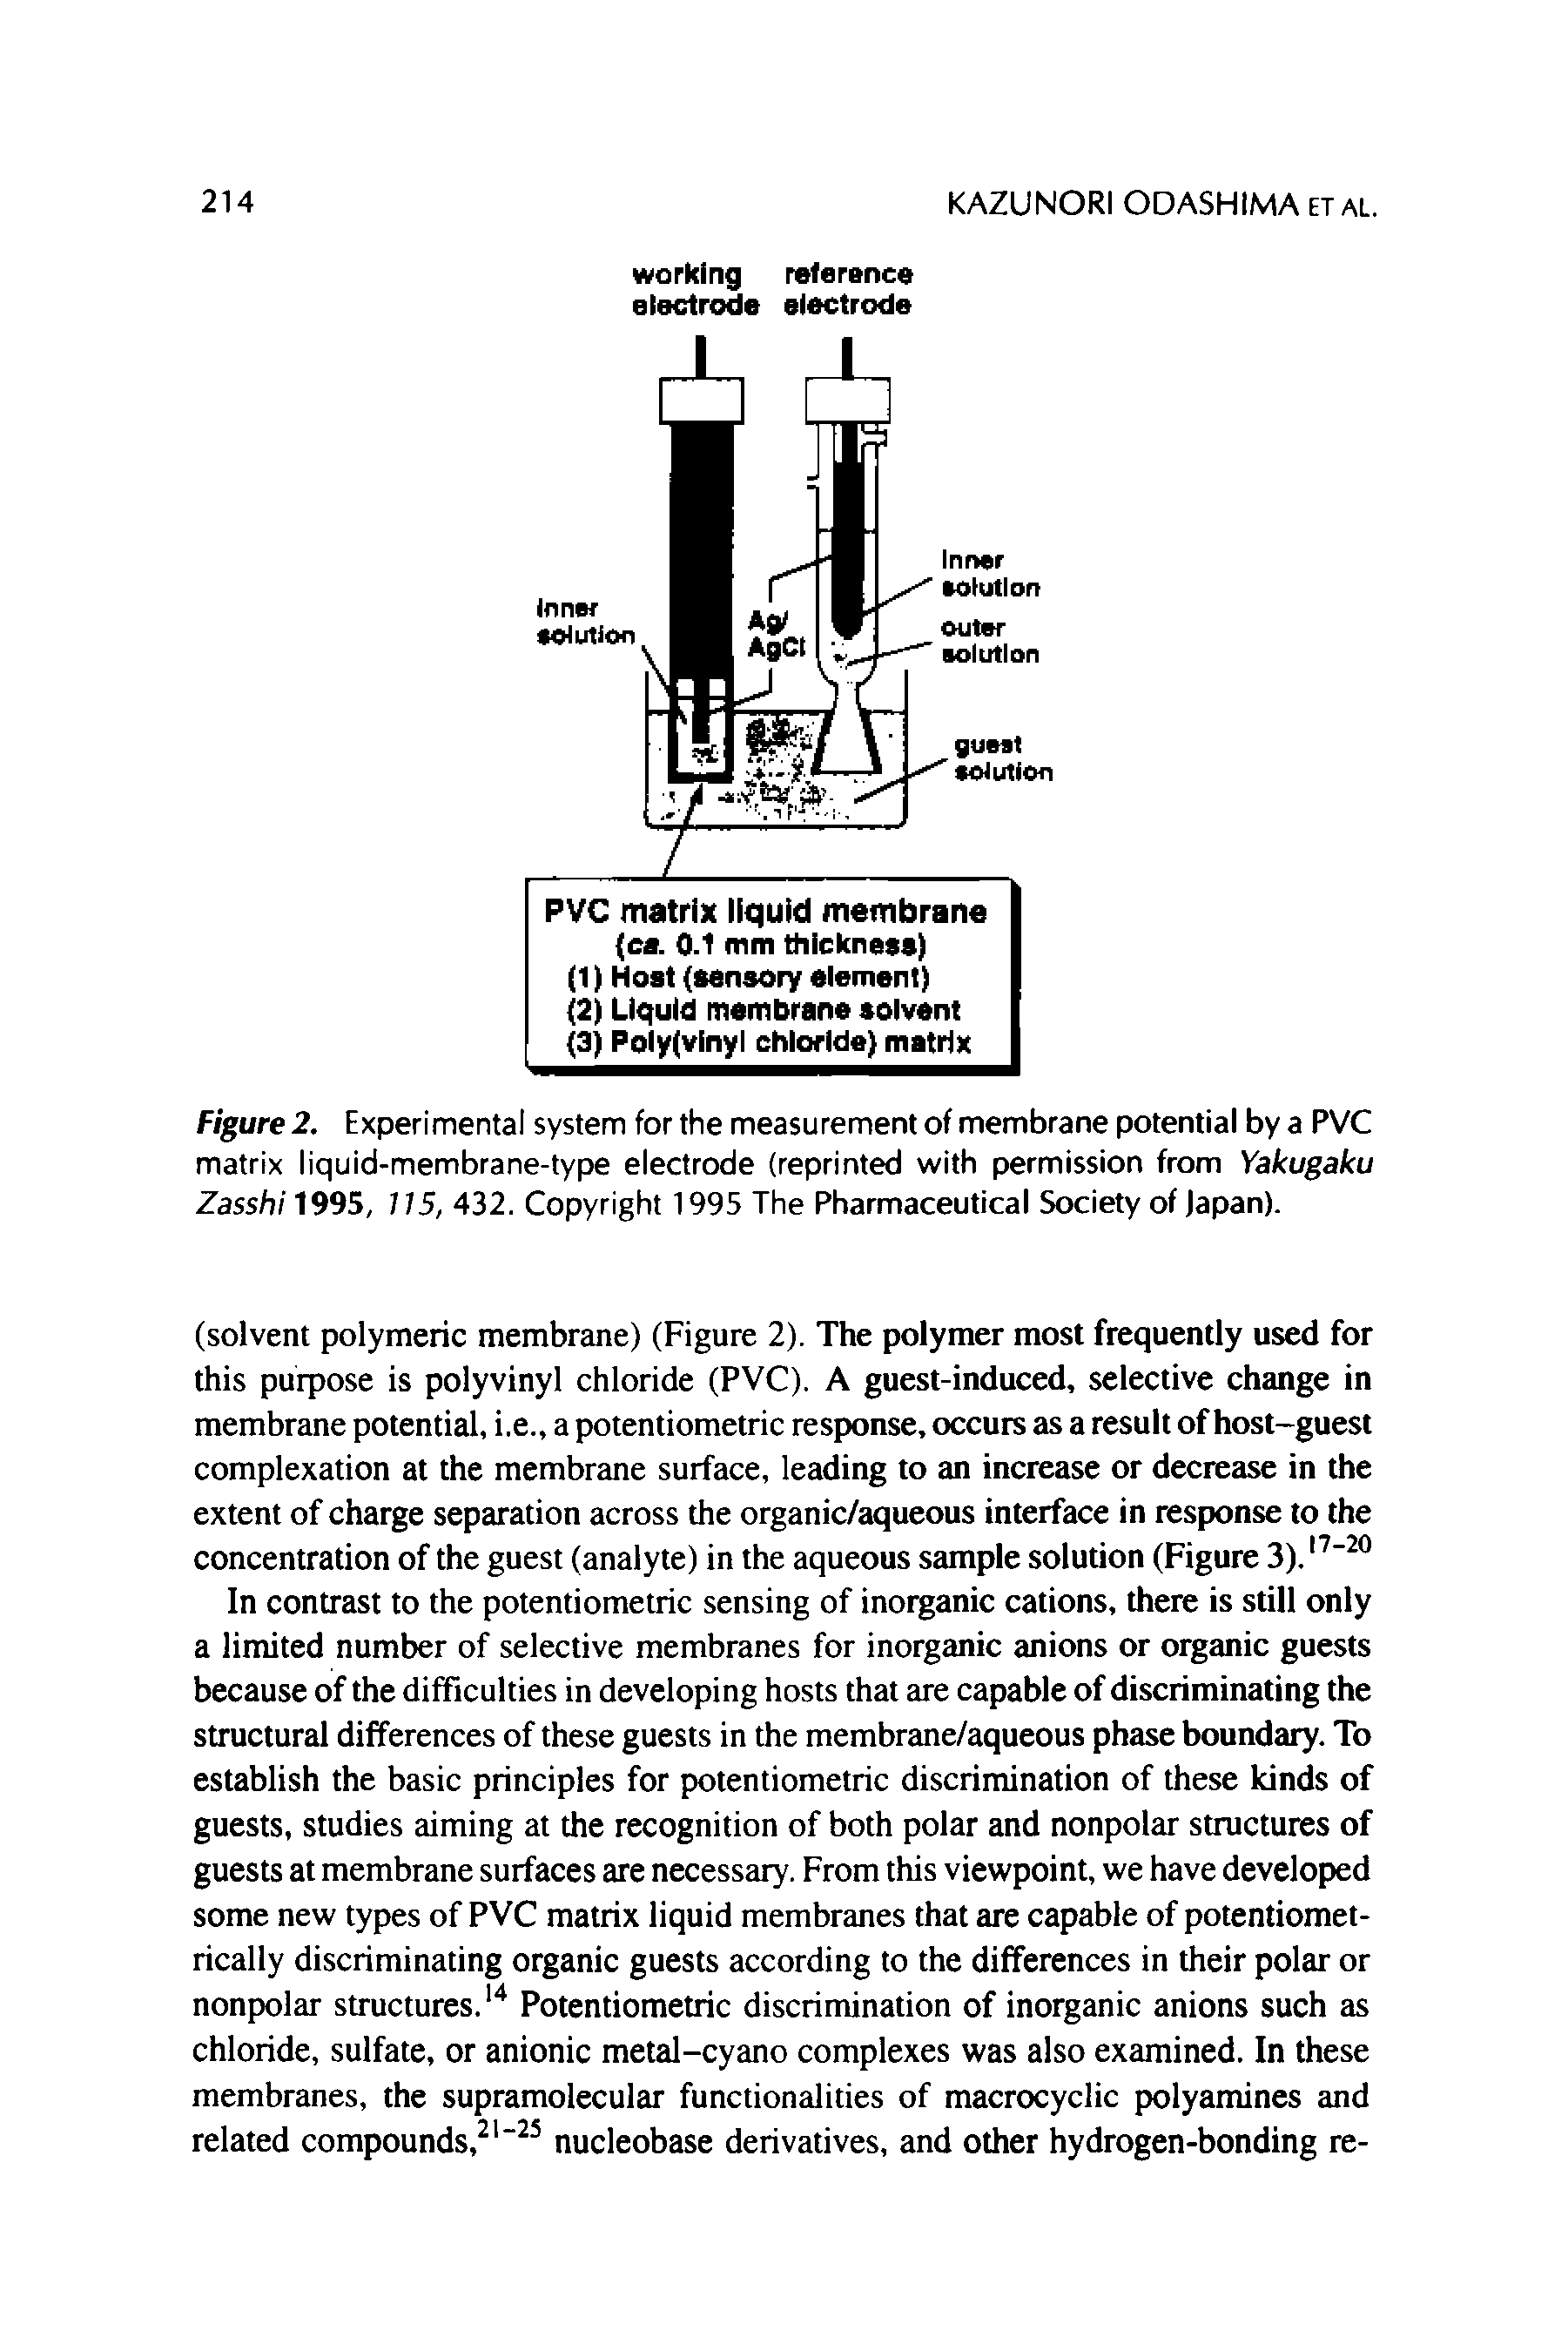 Figure 2. Experimental system for the measurement of membrane potential by a PVC matrix liquid-membrane-type electrode (reprinted with permission from Yakugaku Zasshi 1995, 115, 432. Copyright 1995 The Pharmaceutical Society of Japan).